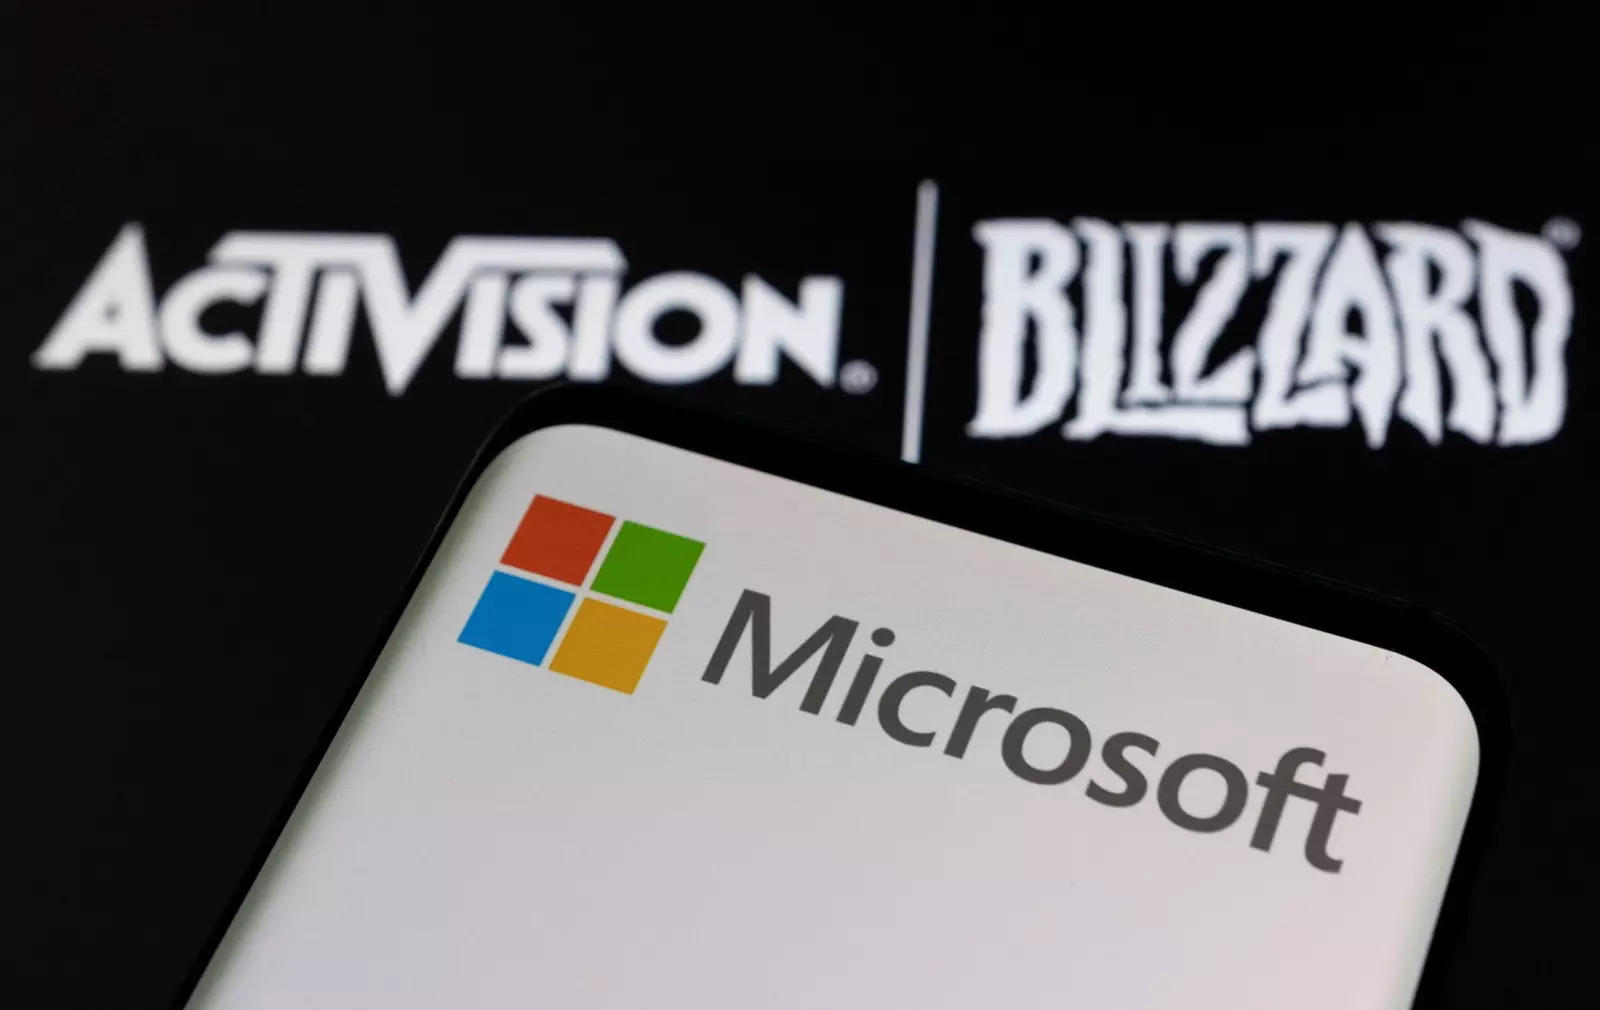 Microsoft is still struggling to get its Activision Blizzard acquisition deal approved by some regulators. Representative Image